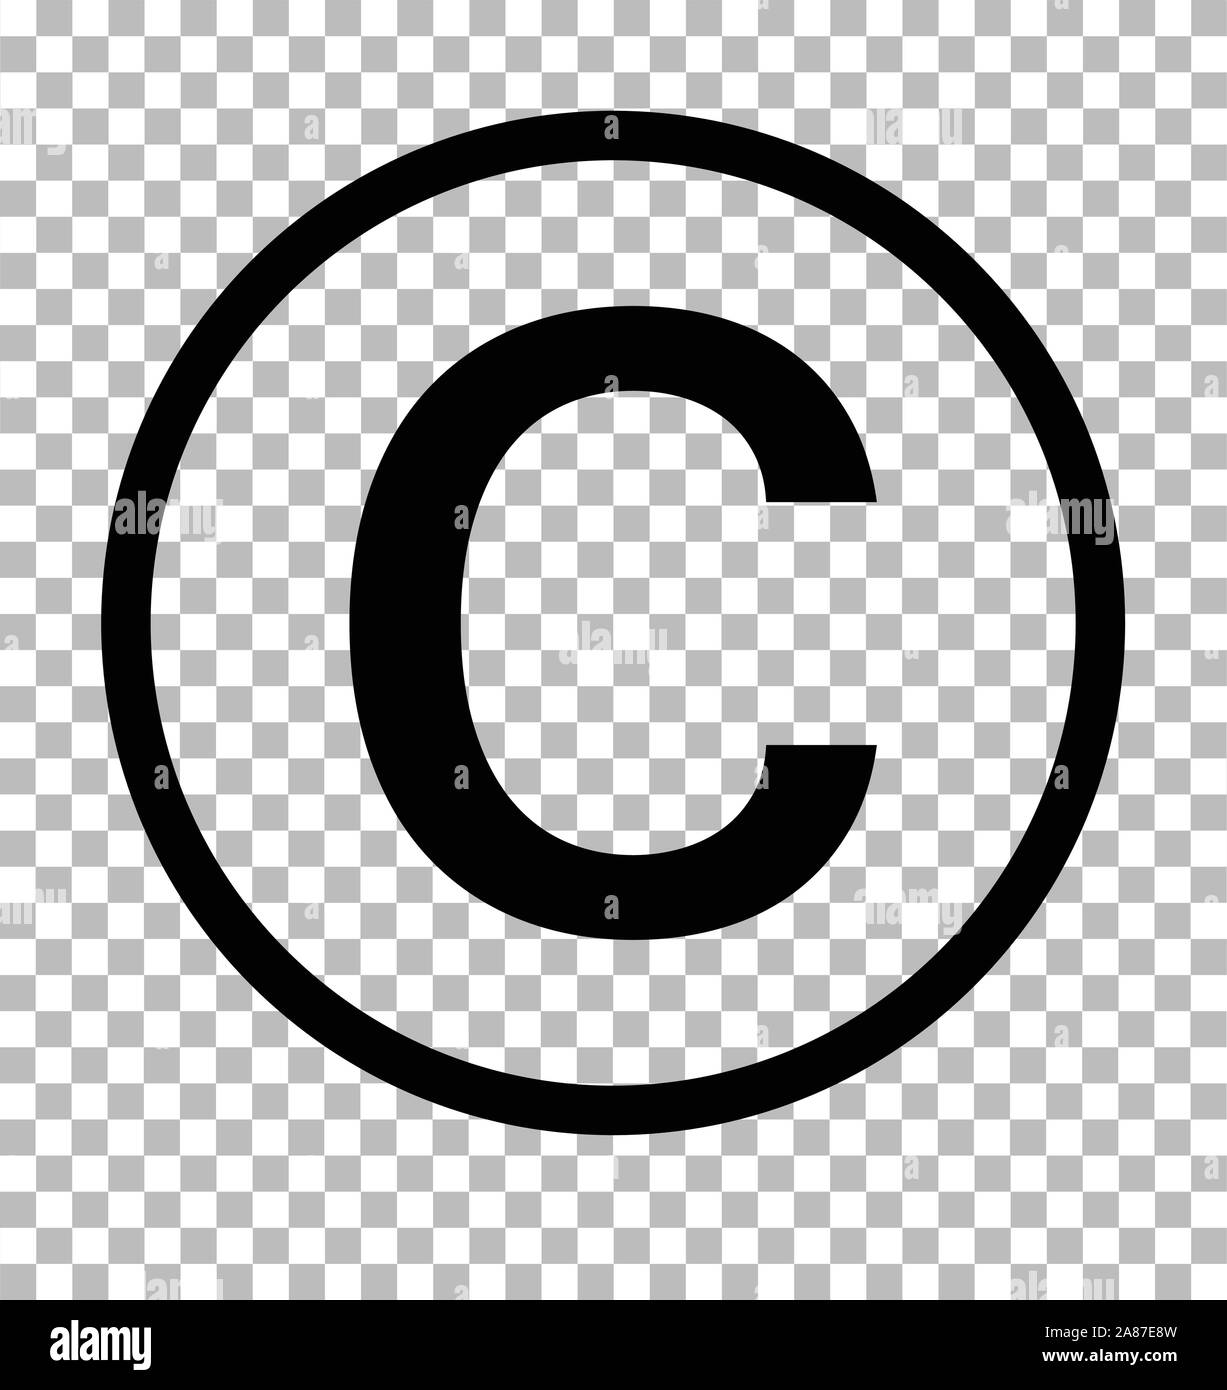 copyright symbol on transparent background. copyright sign. copyright icon Stock Vector